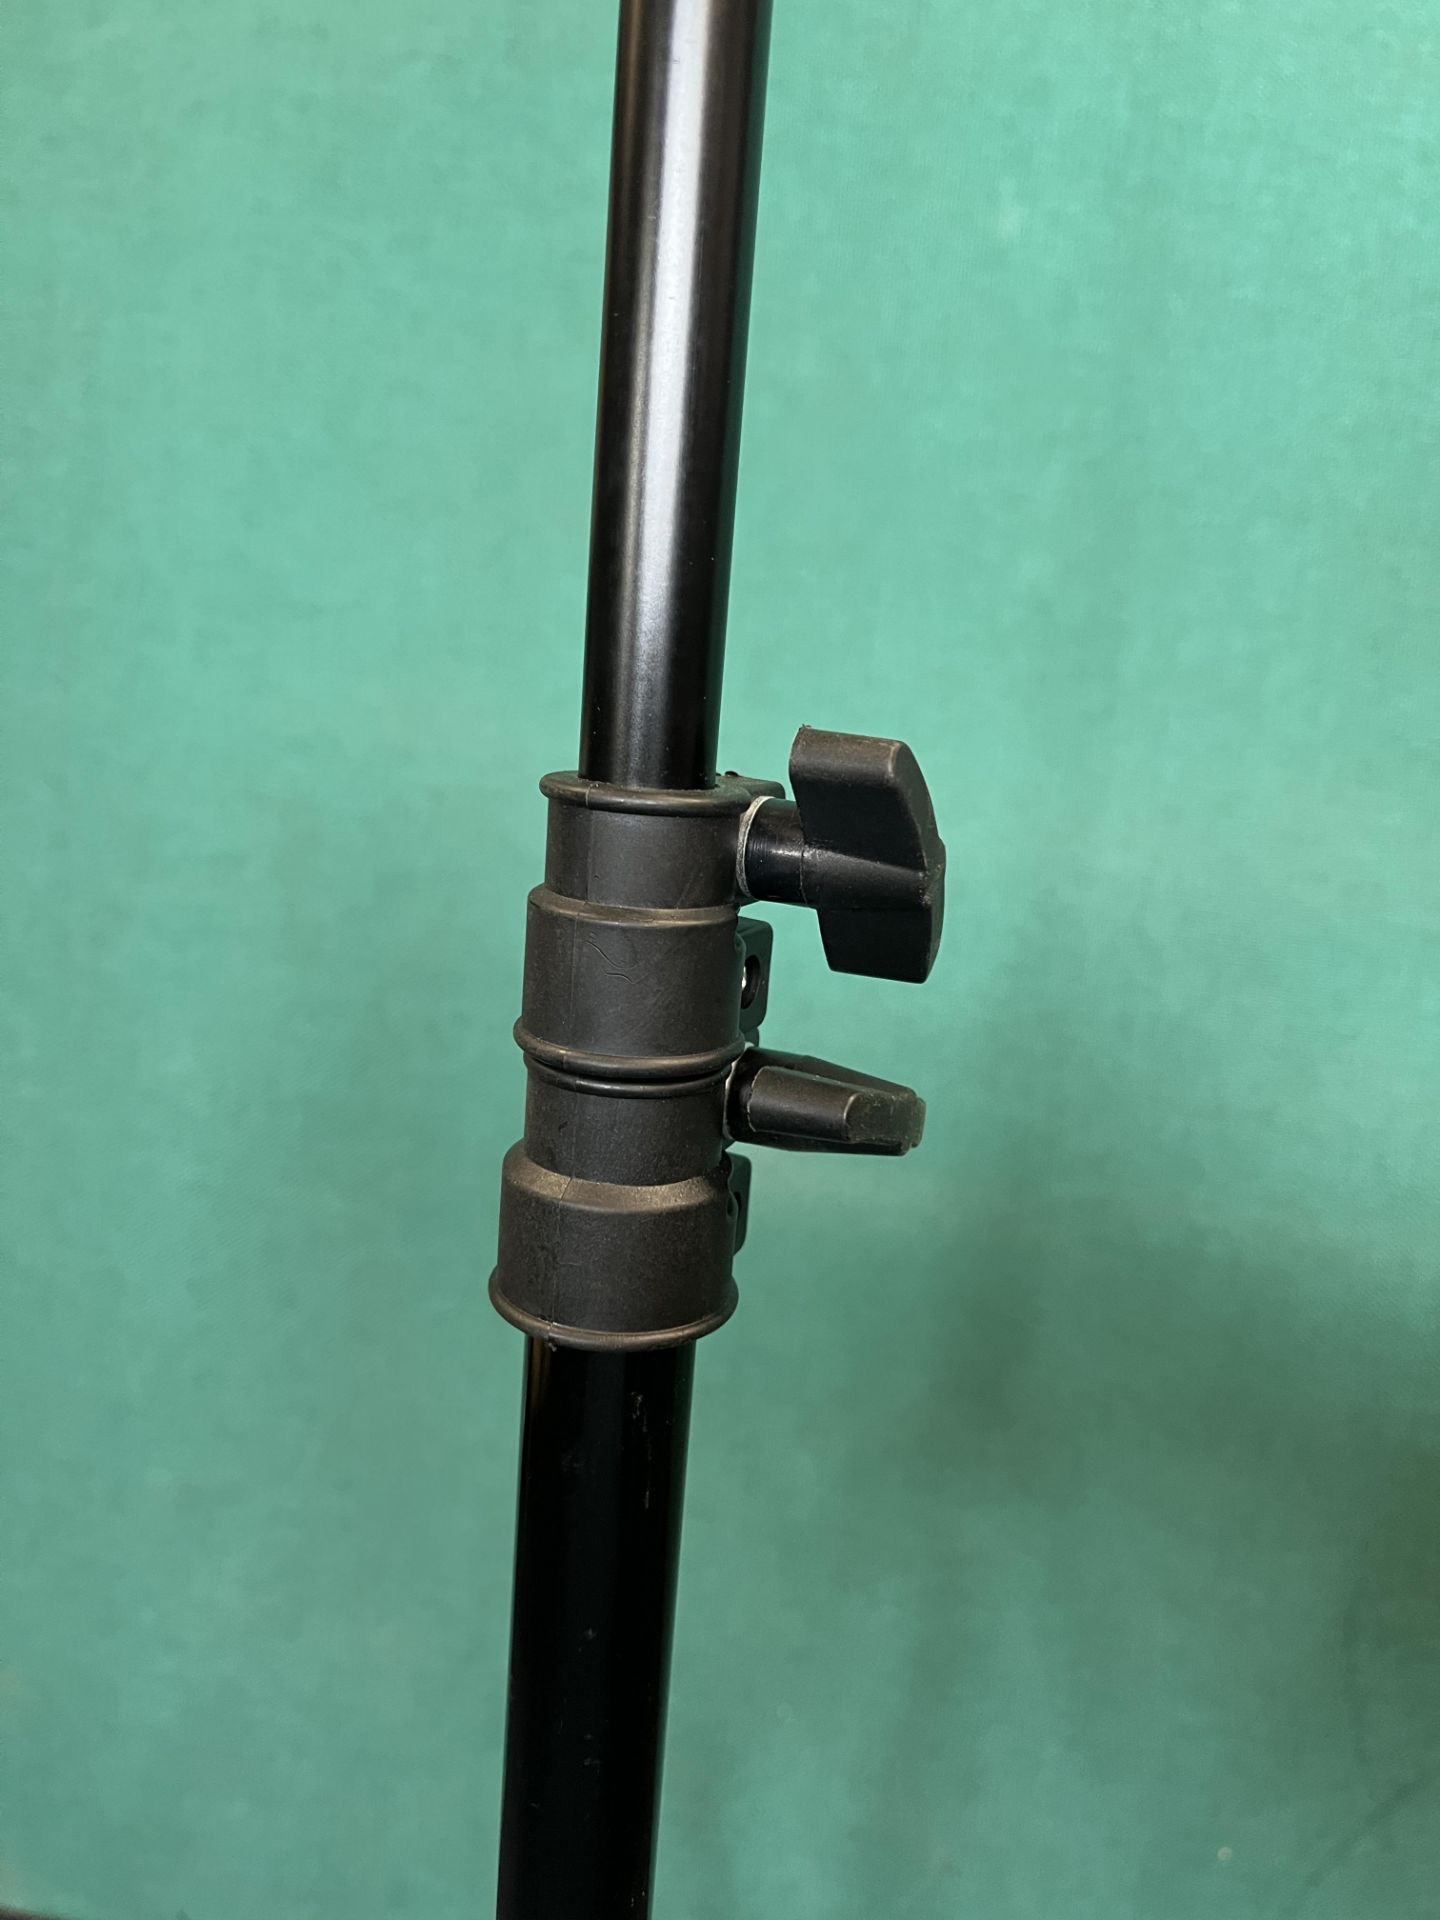 2 x Camera Tripods - As pictured - Image 3 of 6